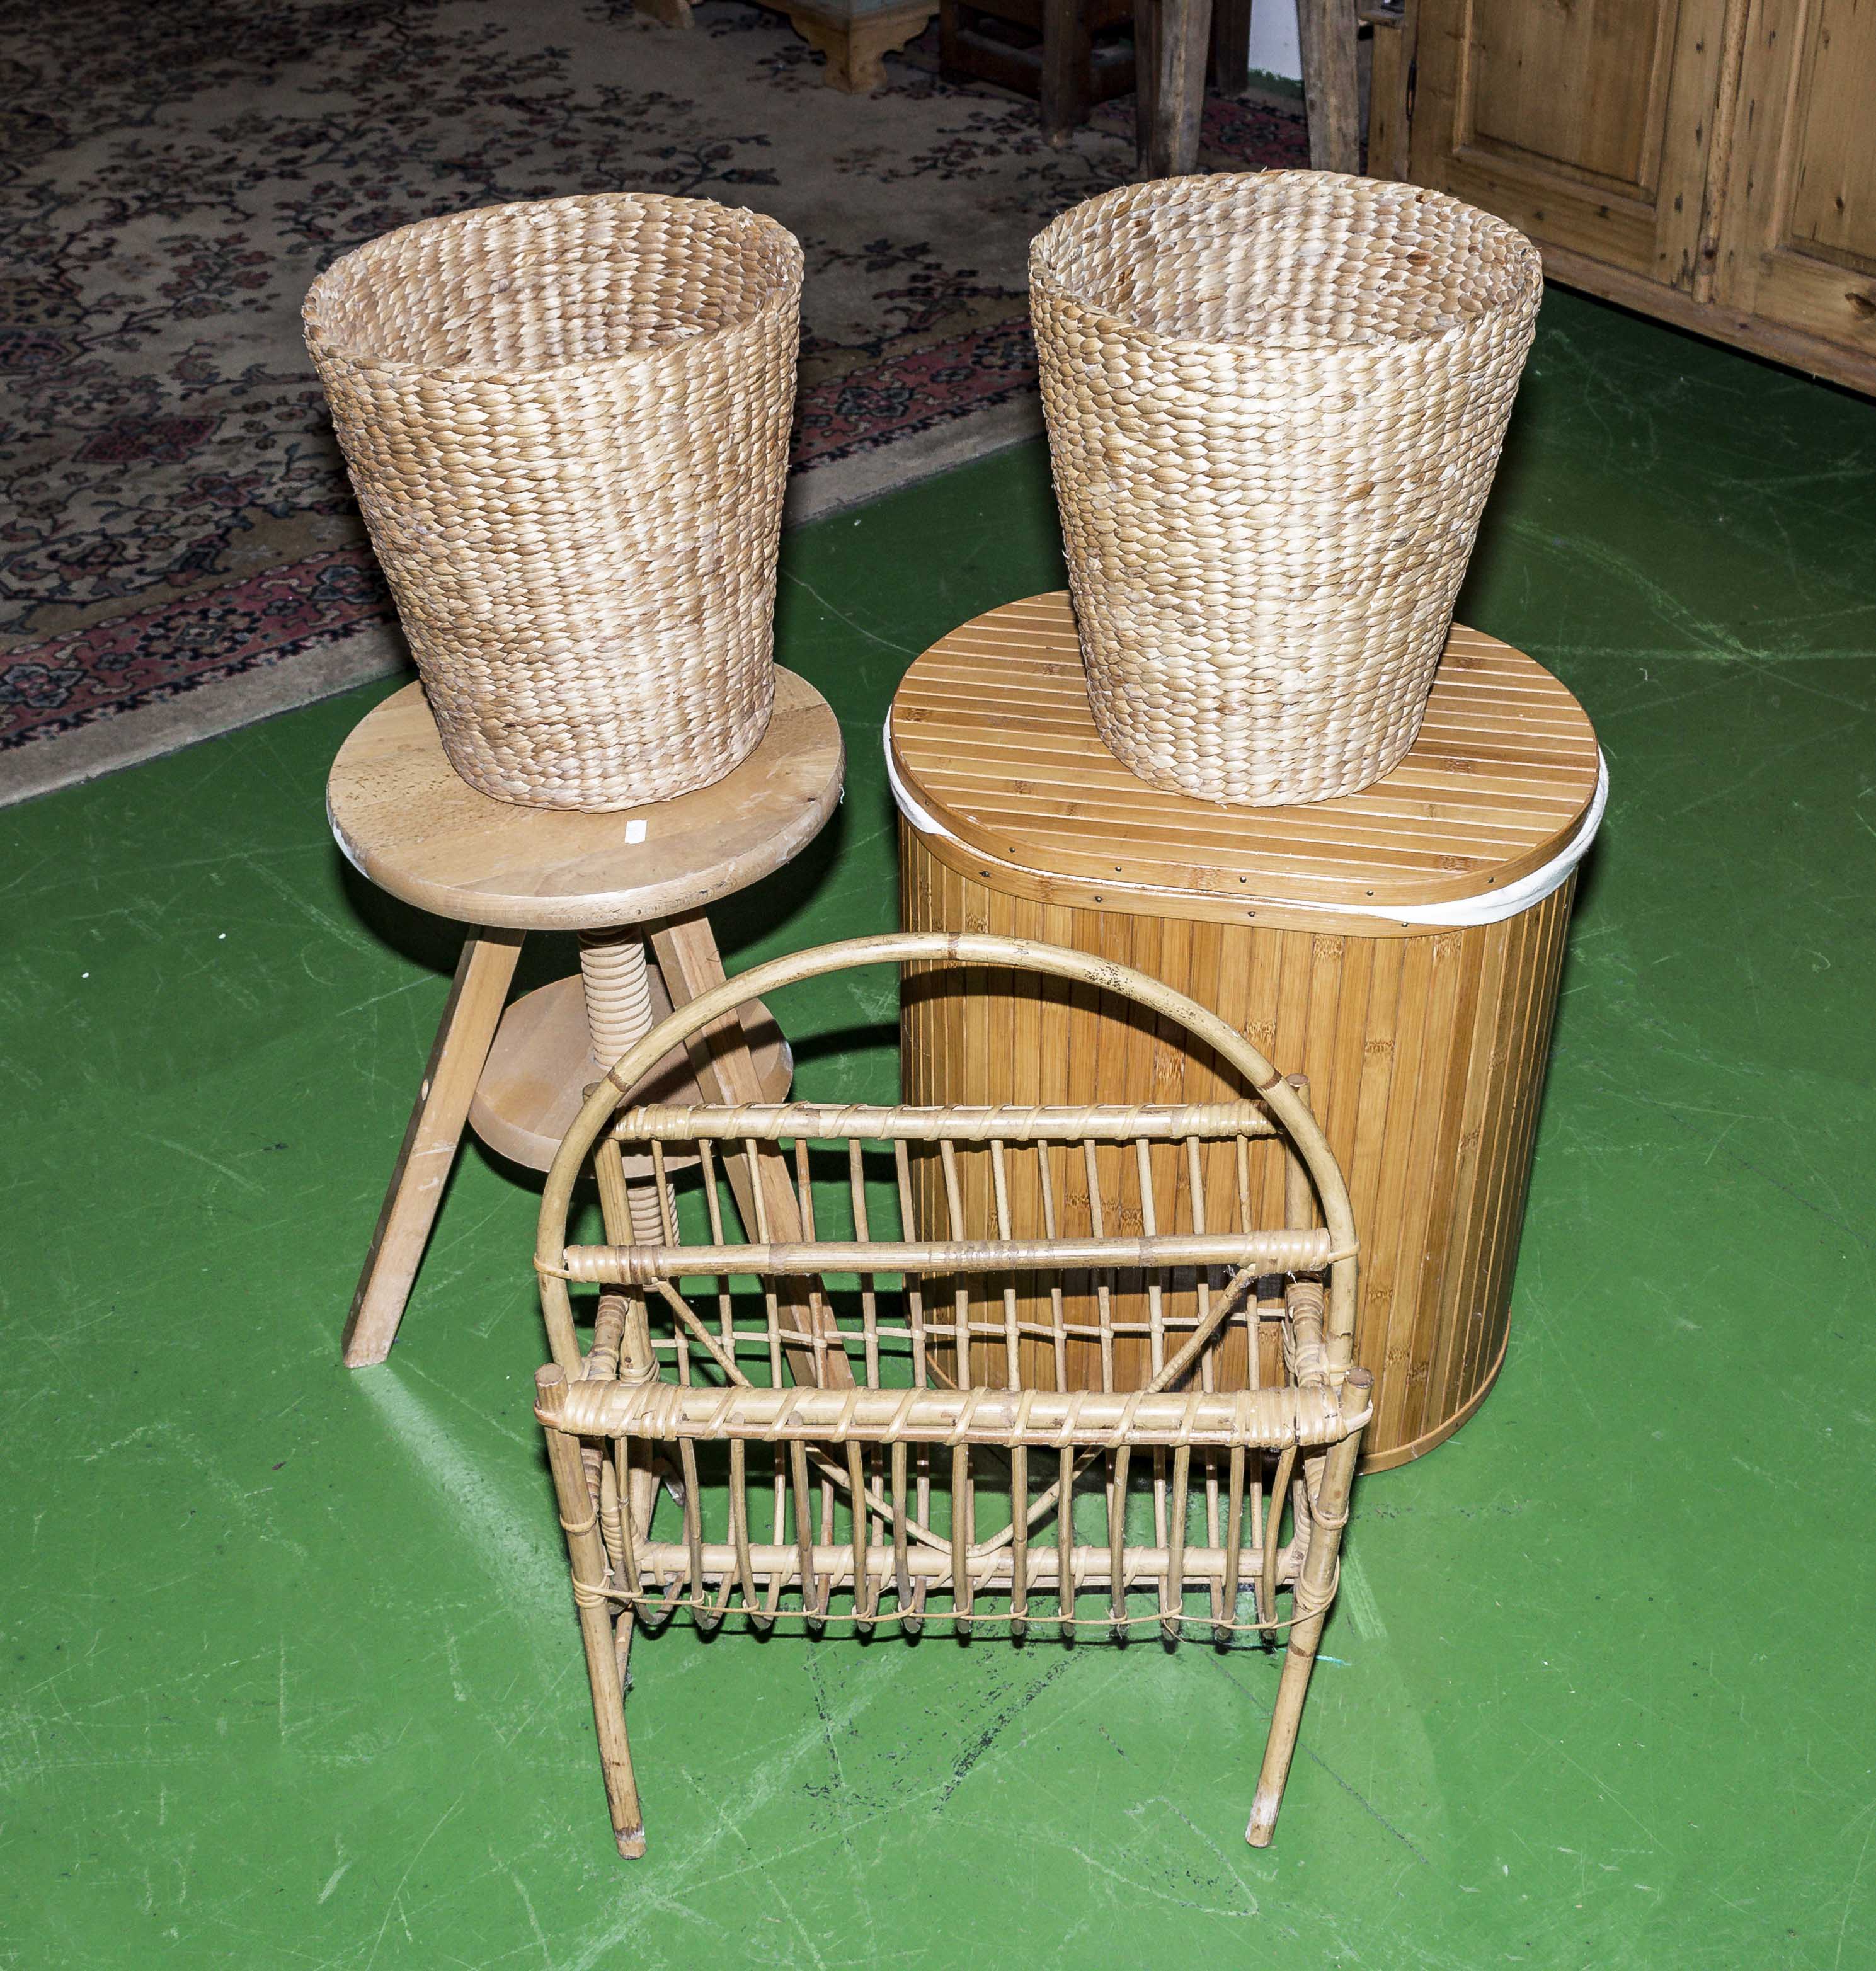 A linen basket, stool, magazine rack and two baskets